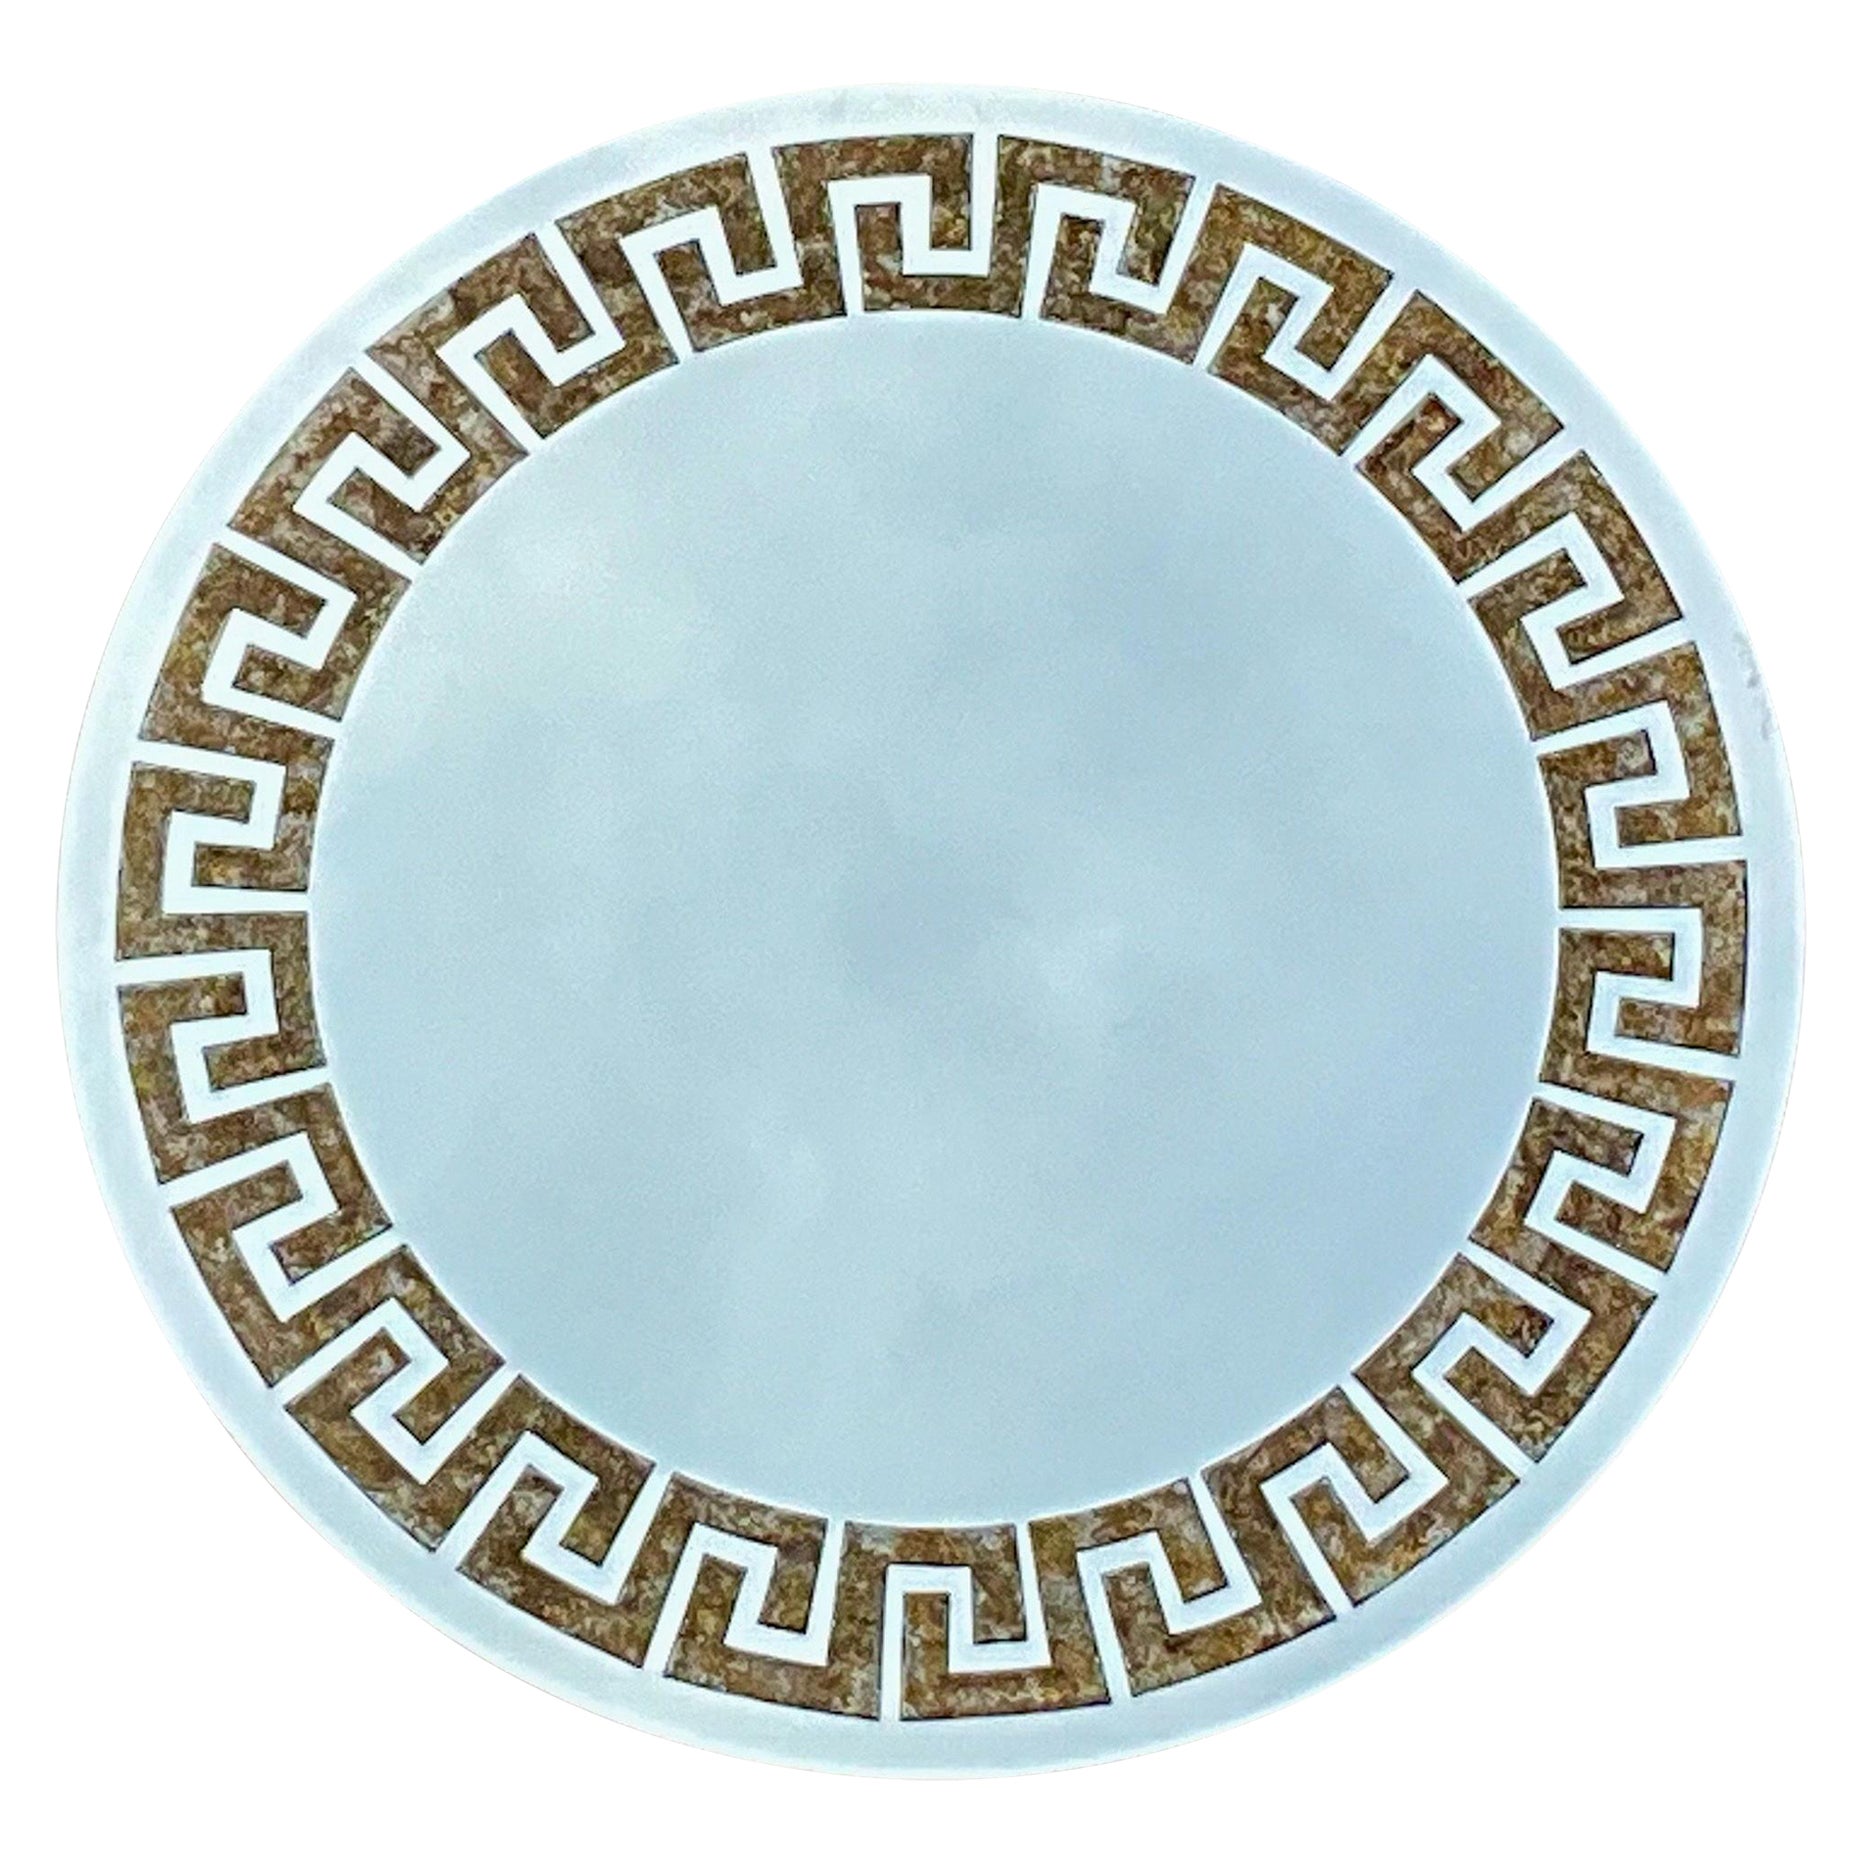 Late 20th-C. Neo-Classical Style Faux Tortoise & Greek Key Round Wall Mirror